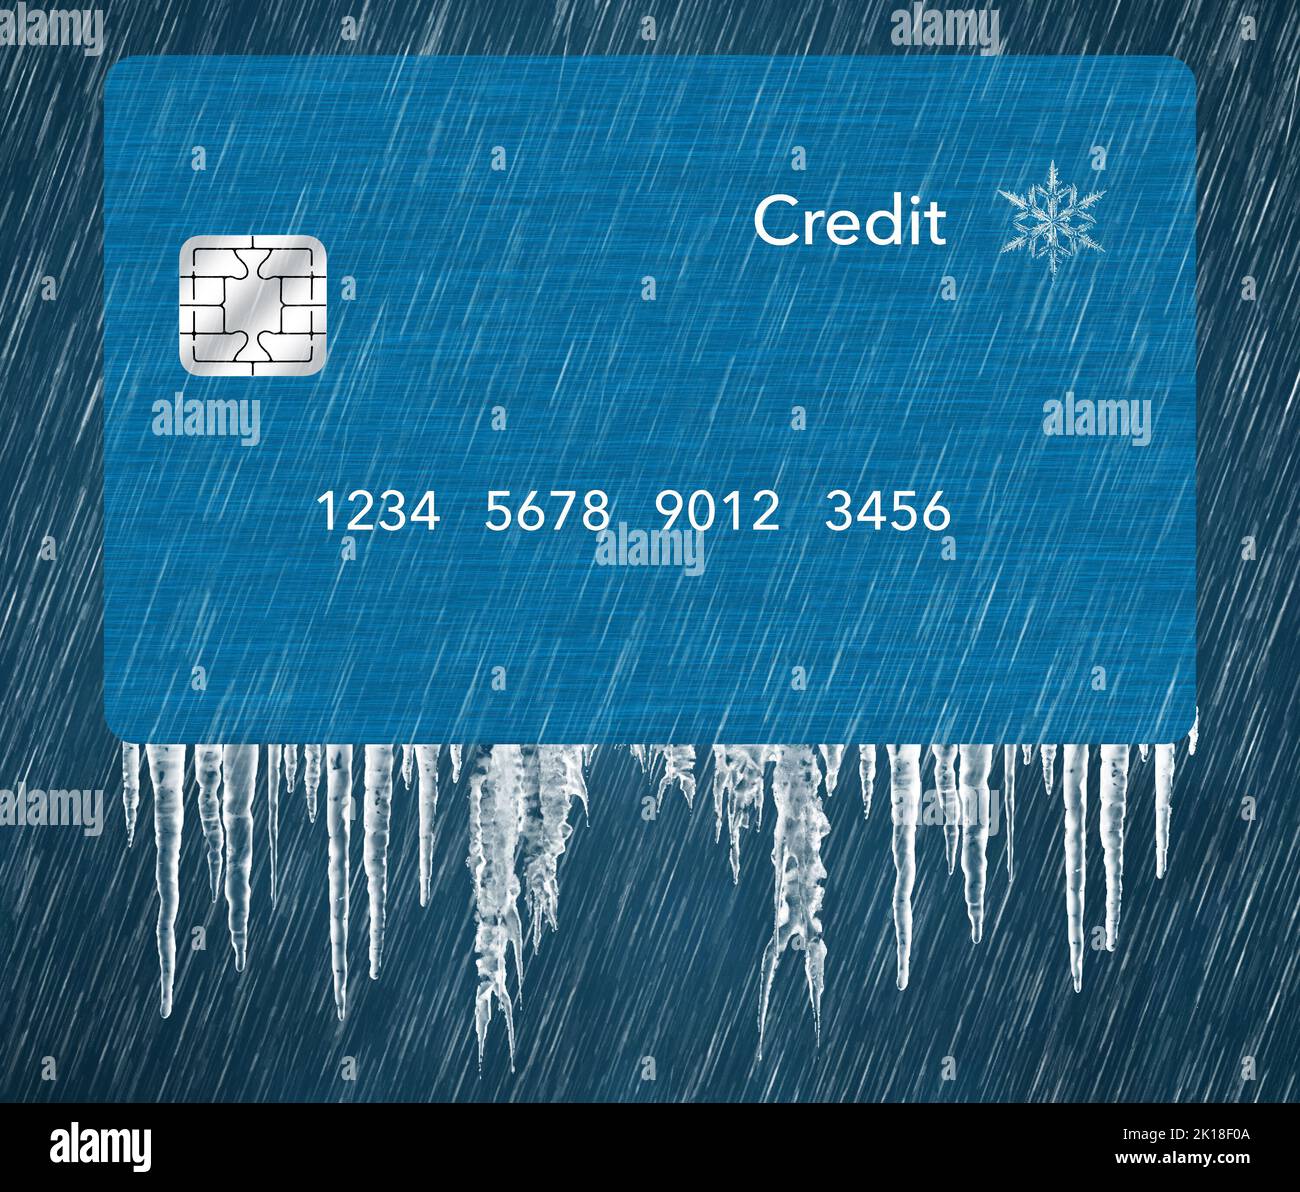 A generic blue credit card is seen in a snowstorm with icicles in a 3-d illustration about putting a credit freeze on a credit report. Stock Photo